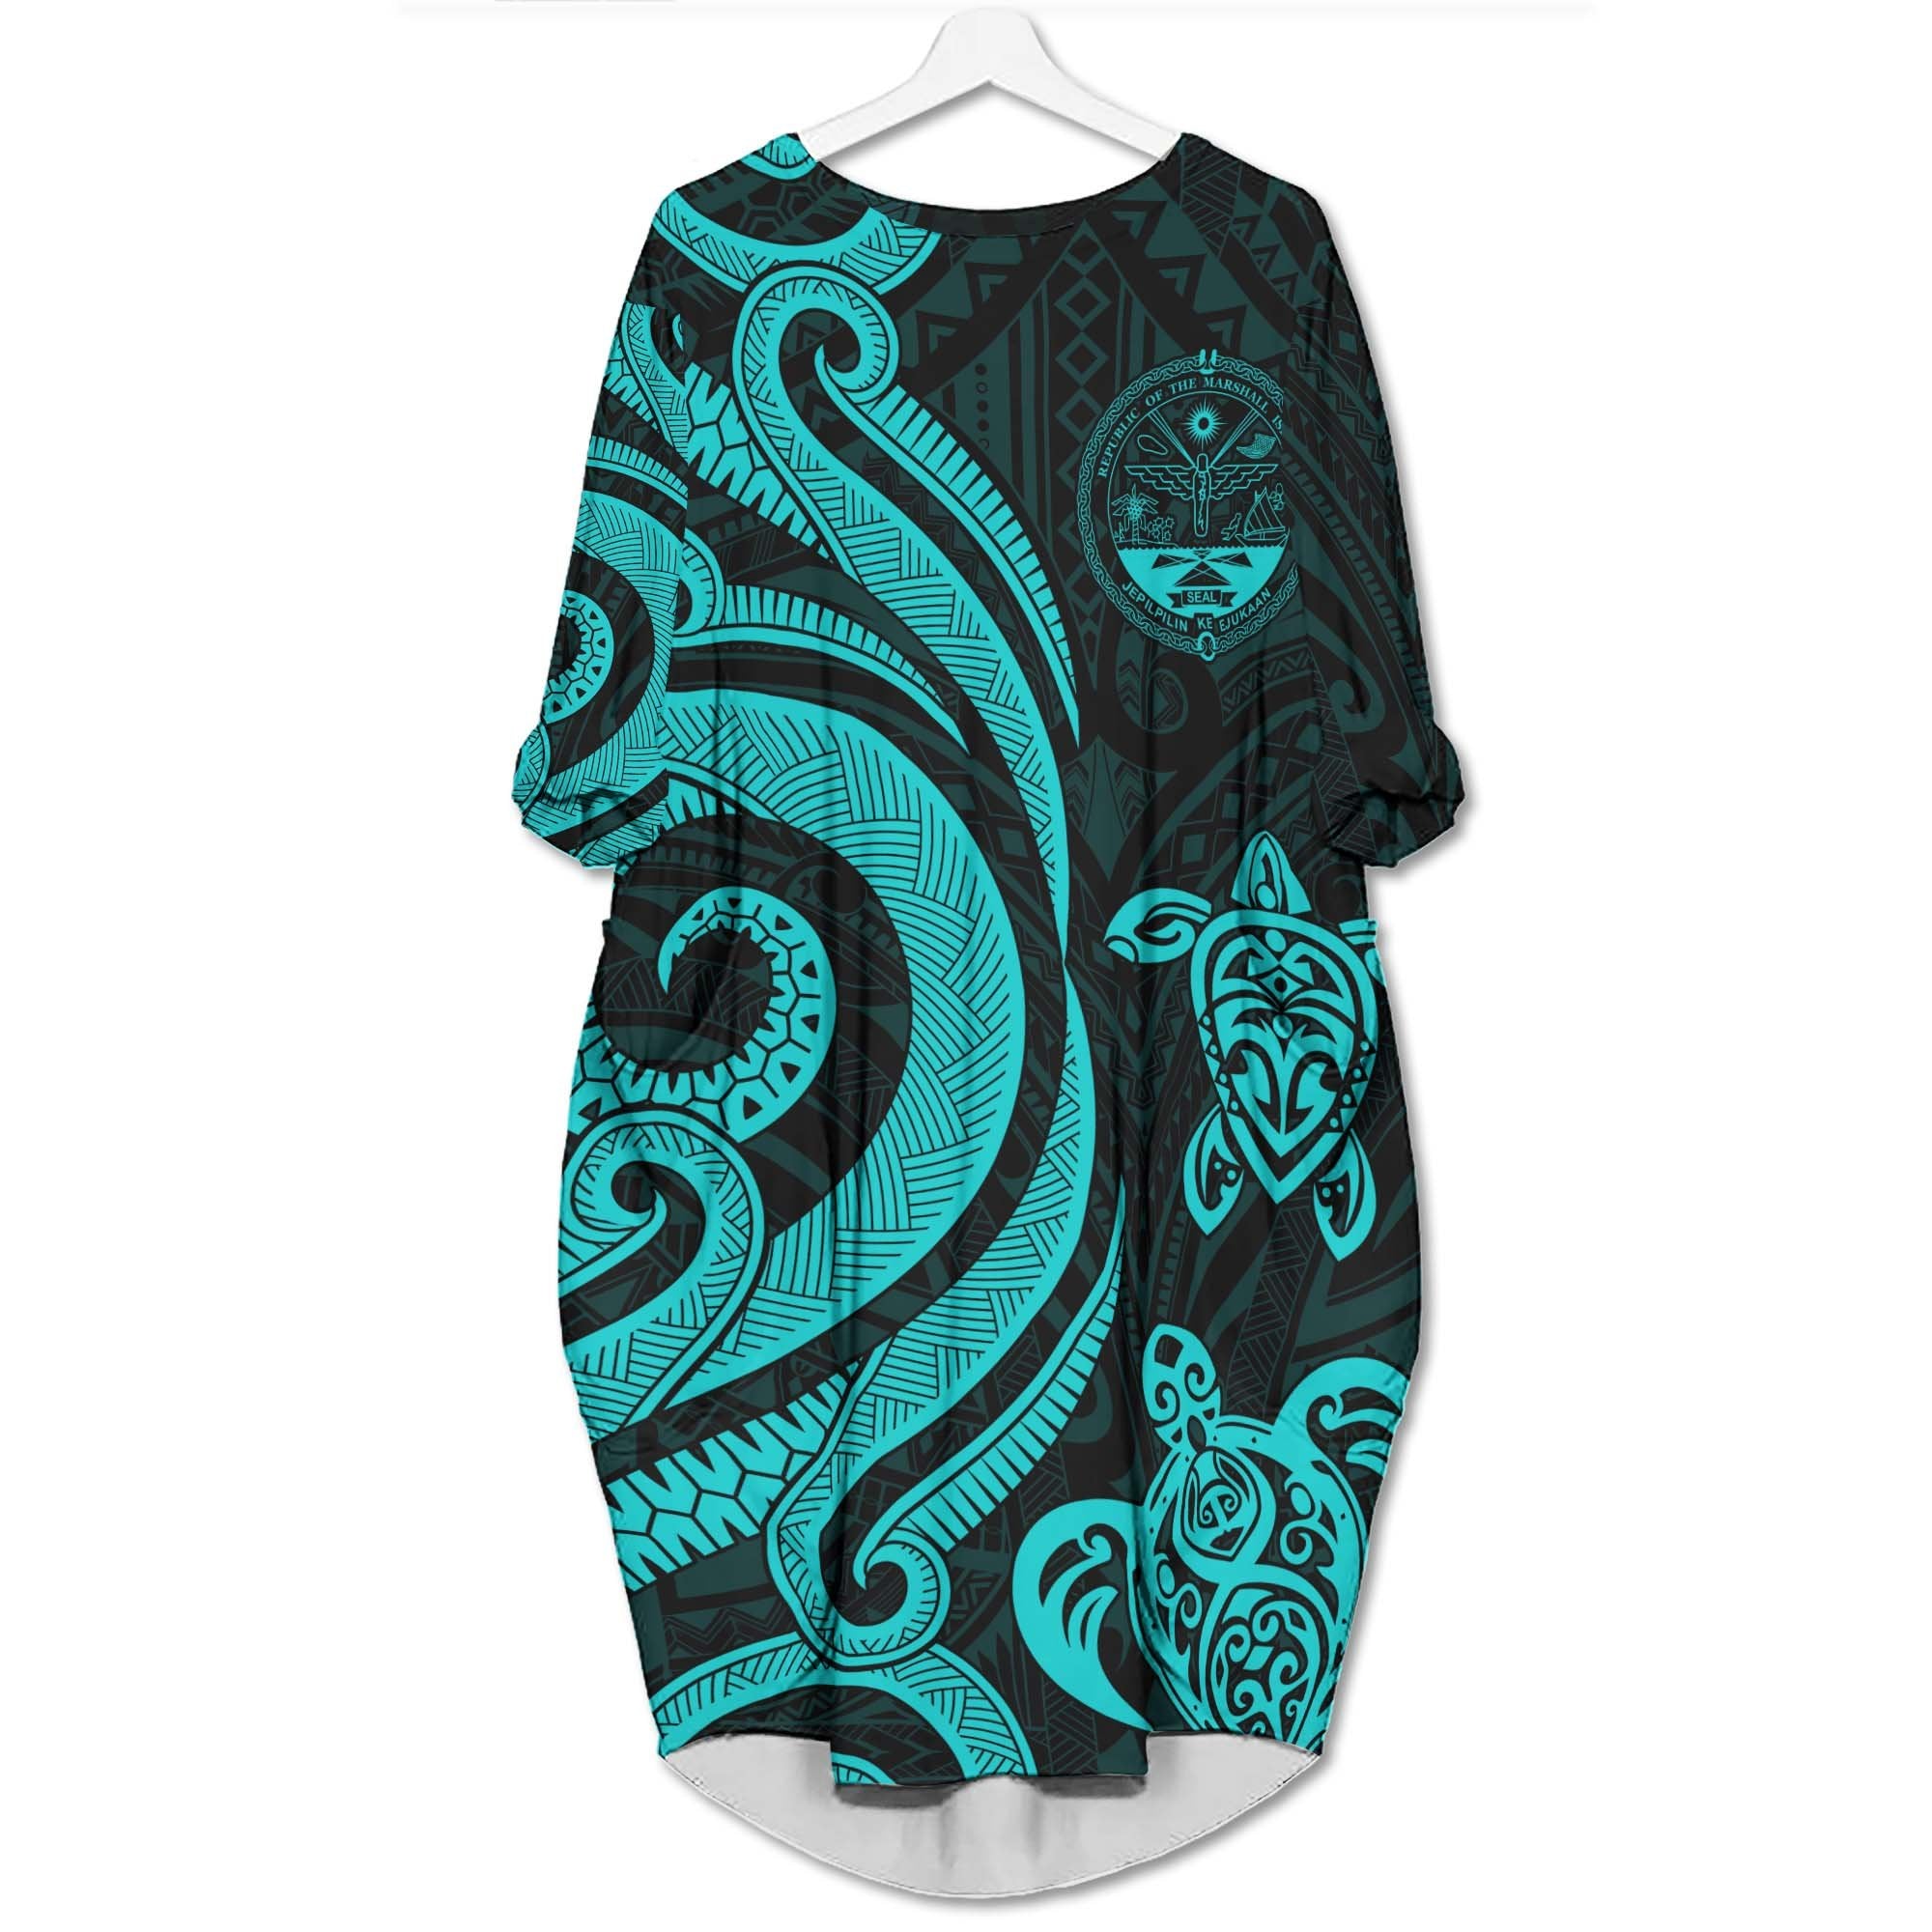 Marshall Islands Batwing Pocket Dress - Turquoise Tentacle Turtle Crest Women Turquoise - Polynesian Pride